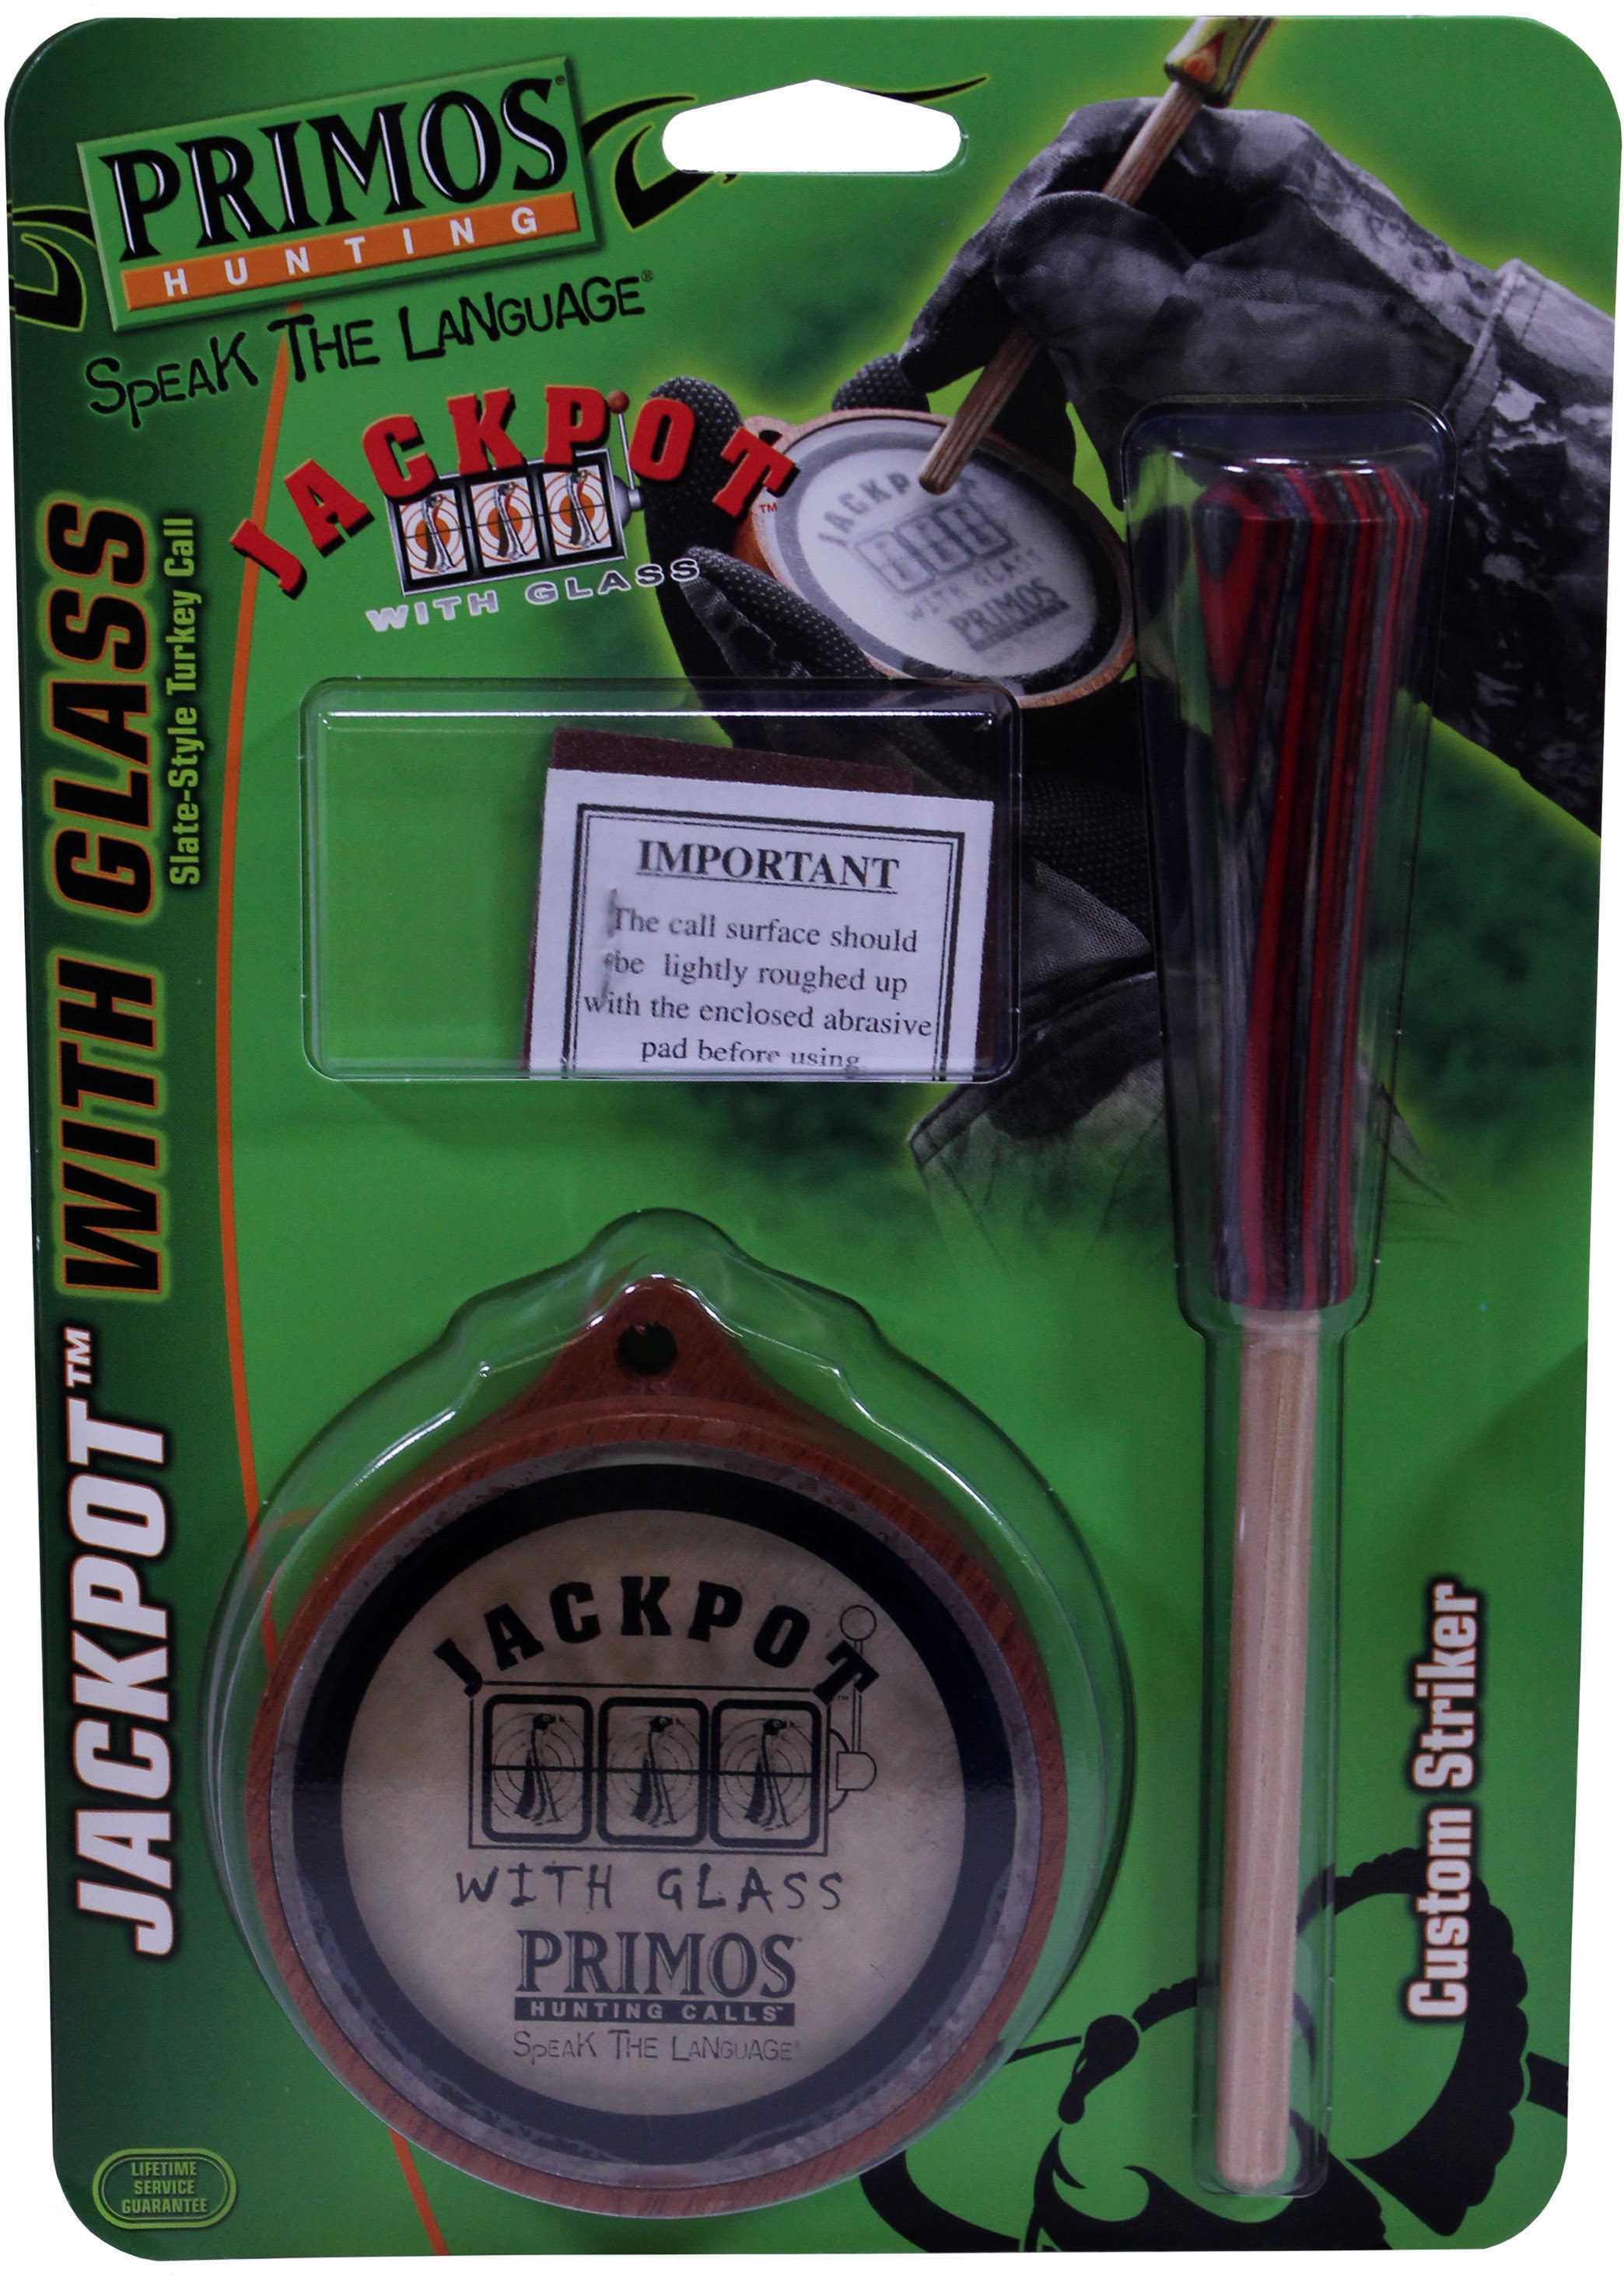 Primos Friction Call, Turkey JACKPOT with Glass 258